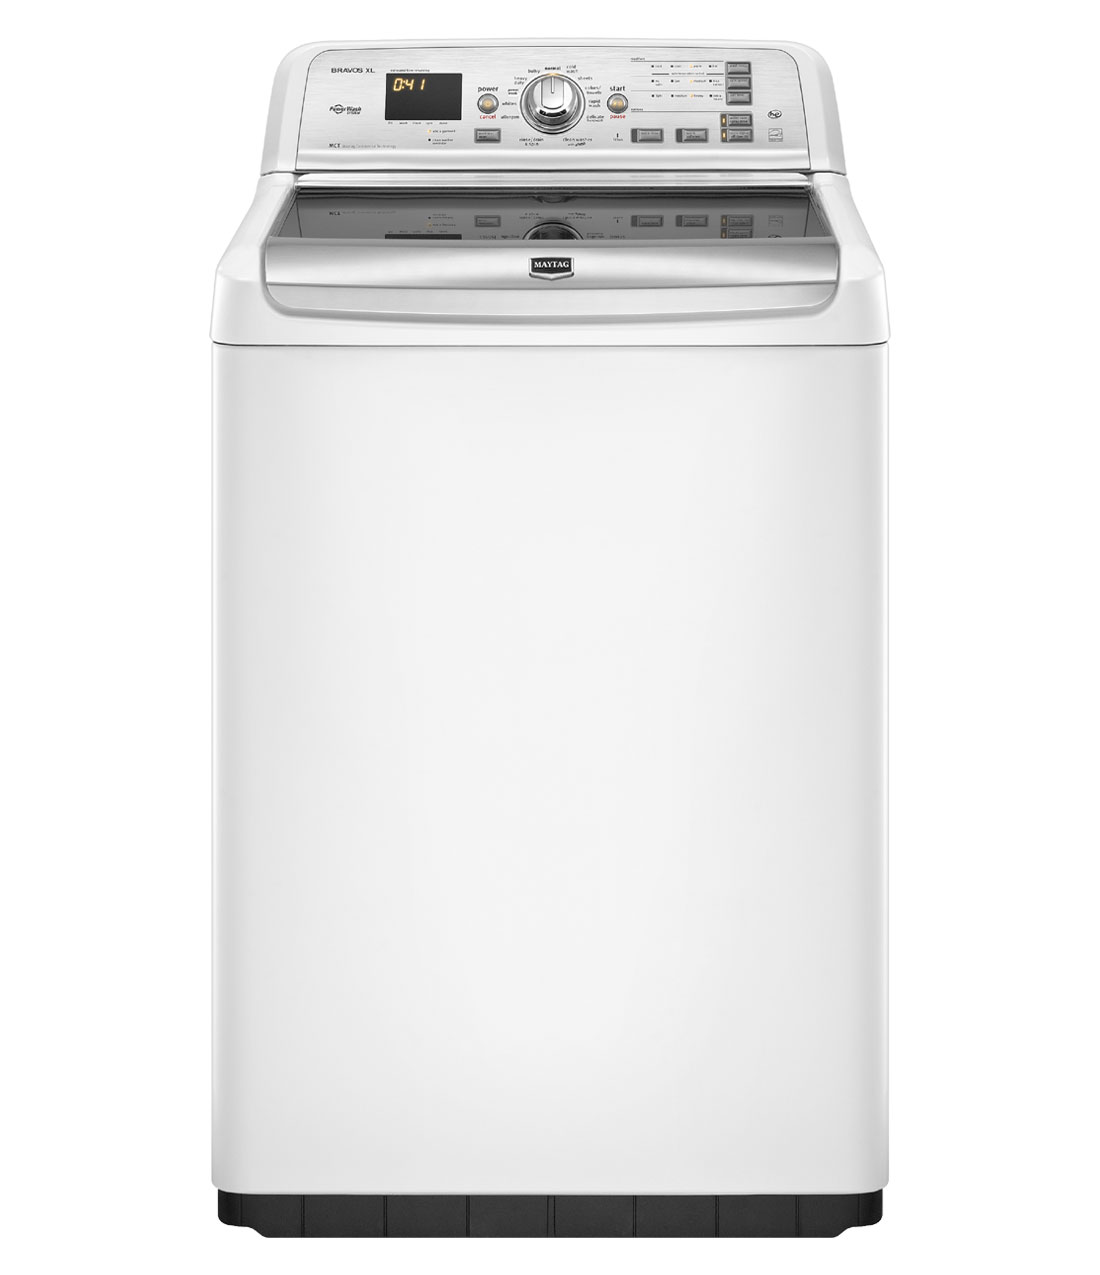 Review of Maytag Bravos XL 4.6 cu. ft. High-Efficiency Top Load Washer in White (Model: MVWB850YW)